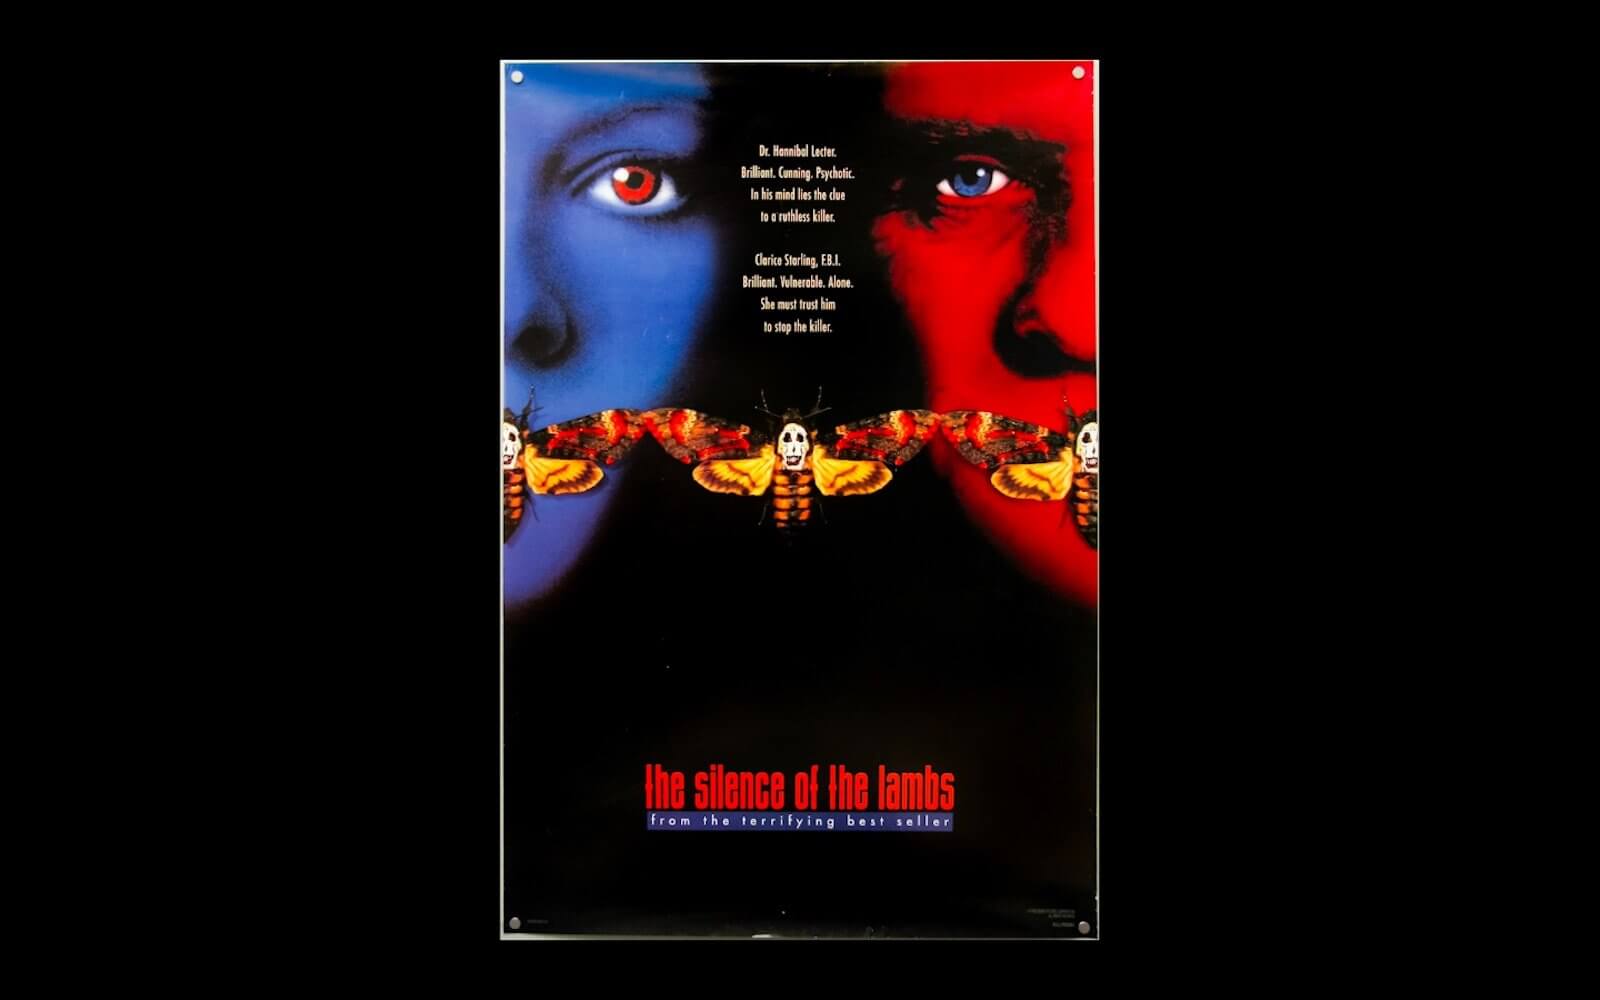 What is a Motif - Silence of the Lambs Movie Poster